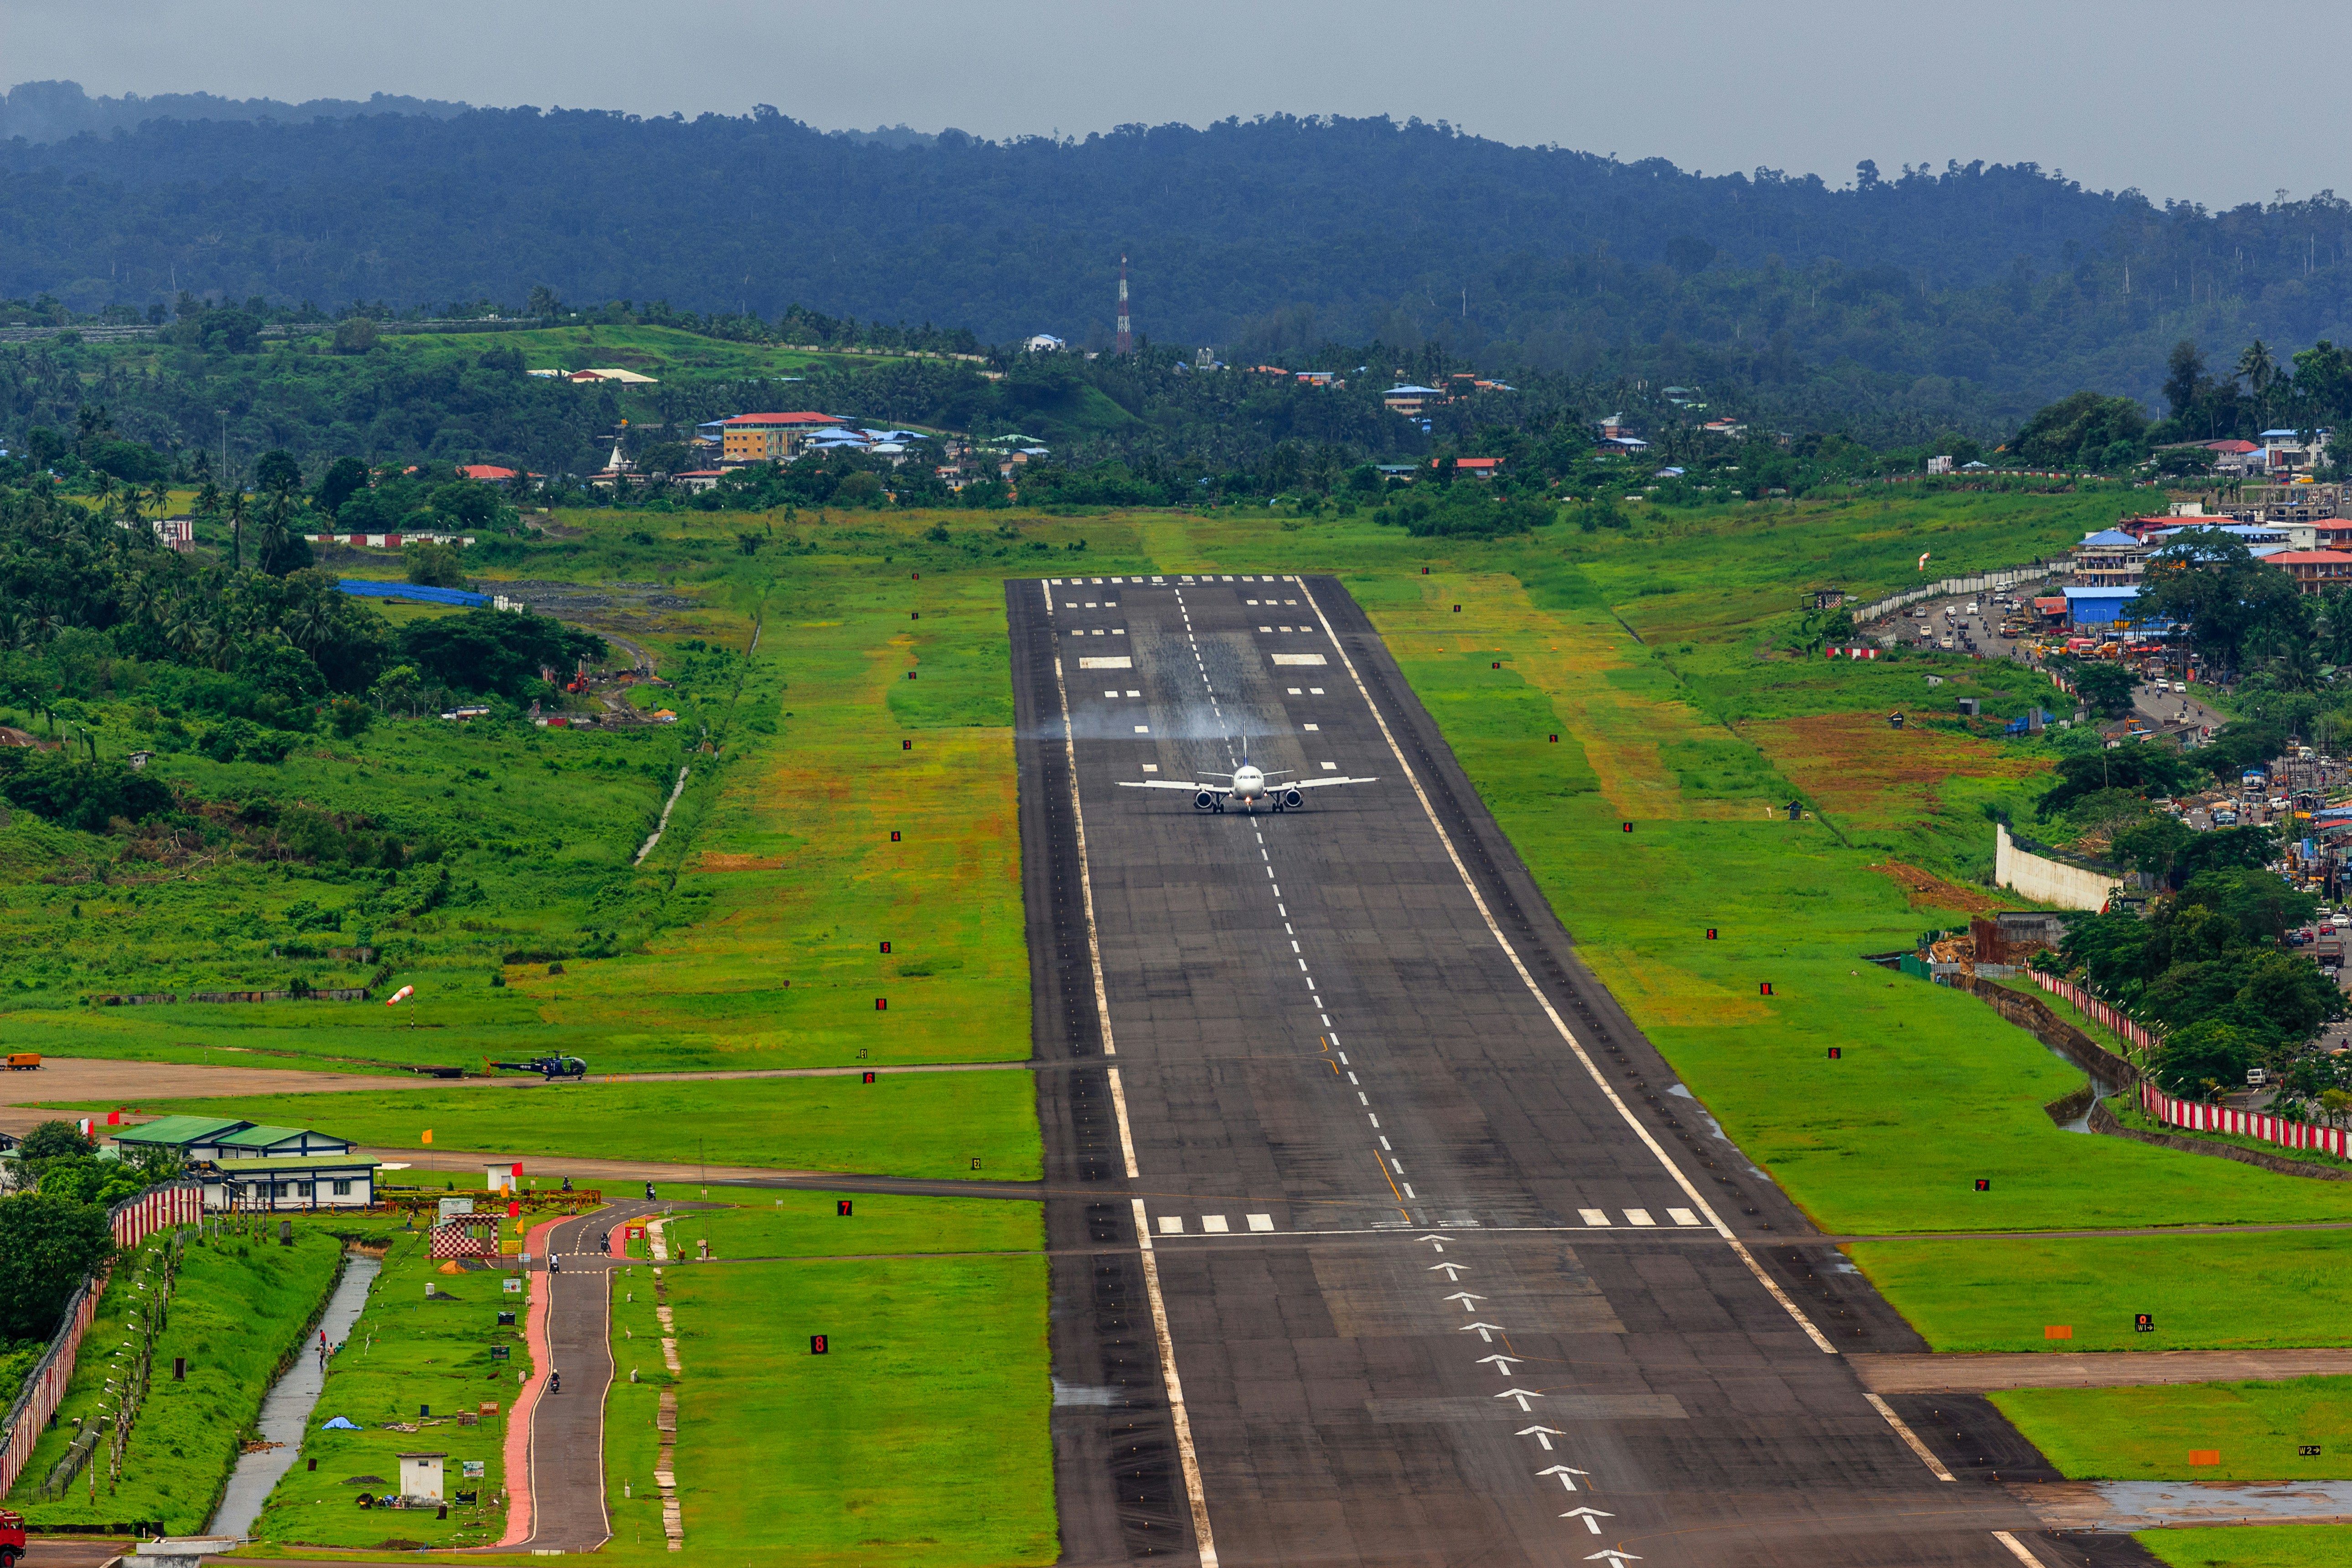 Koh Samui Airport: All You Need to Know